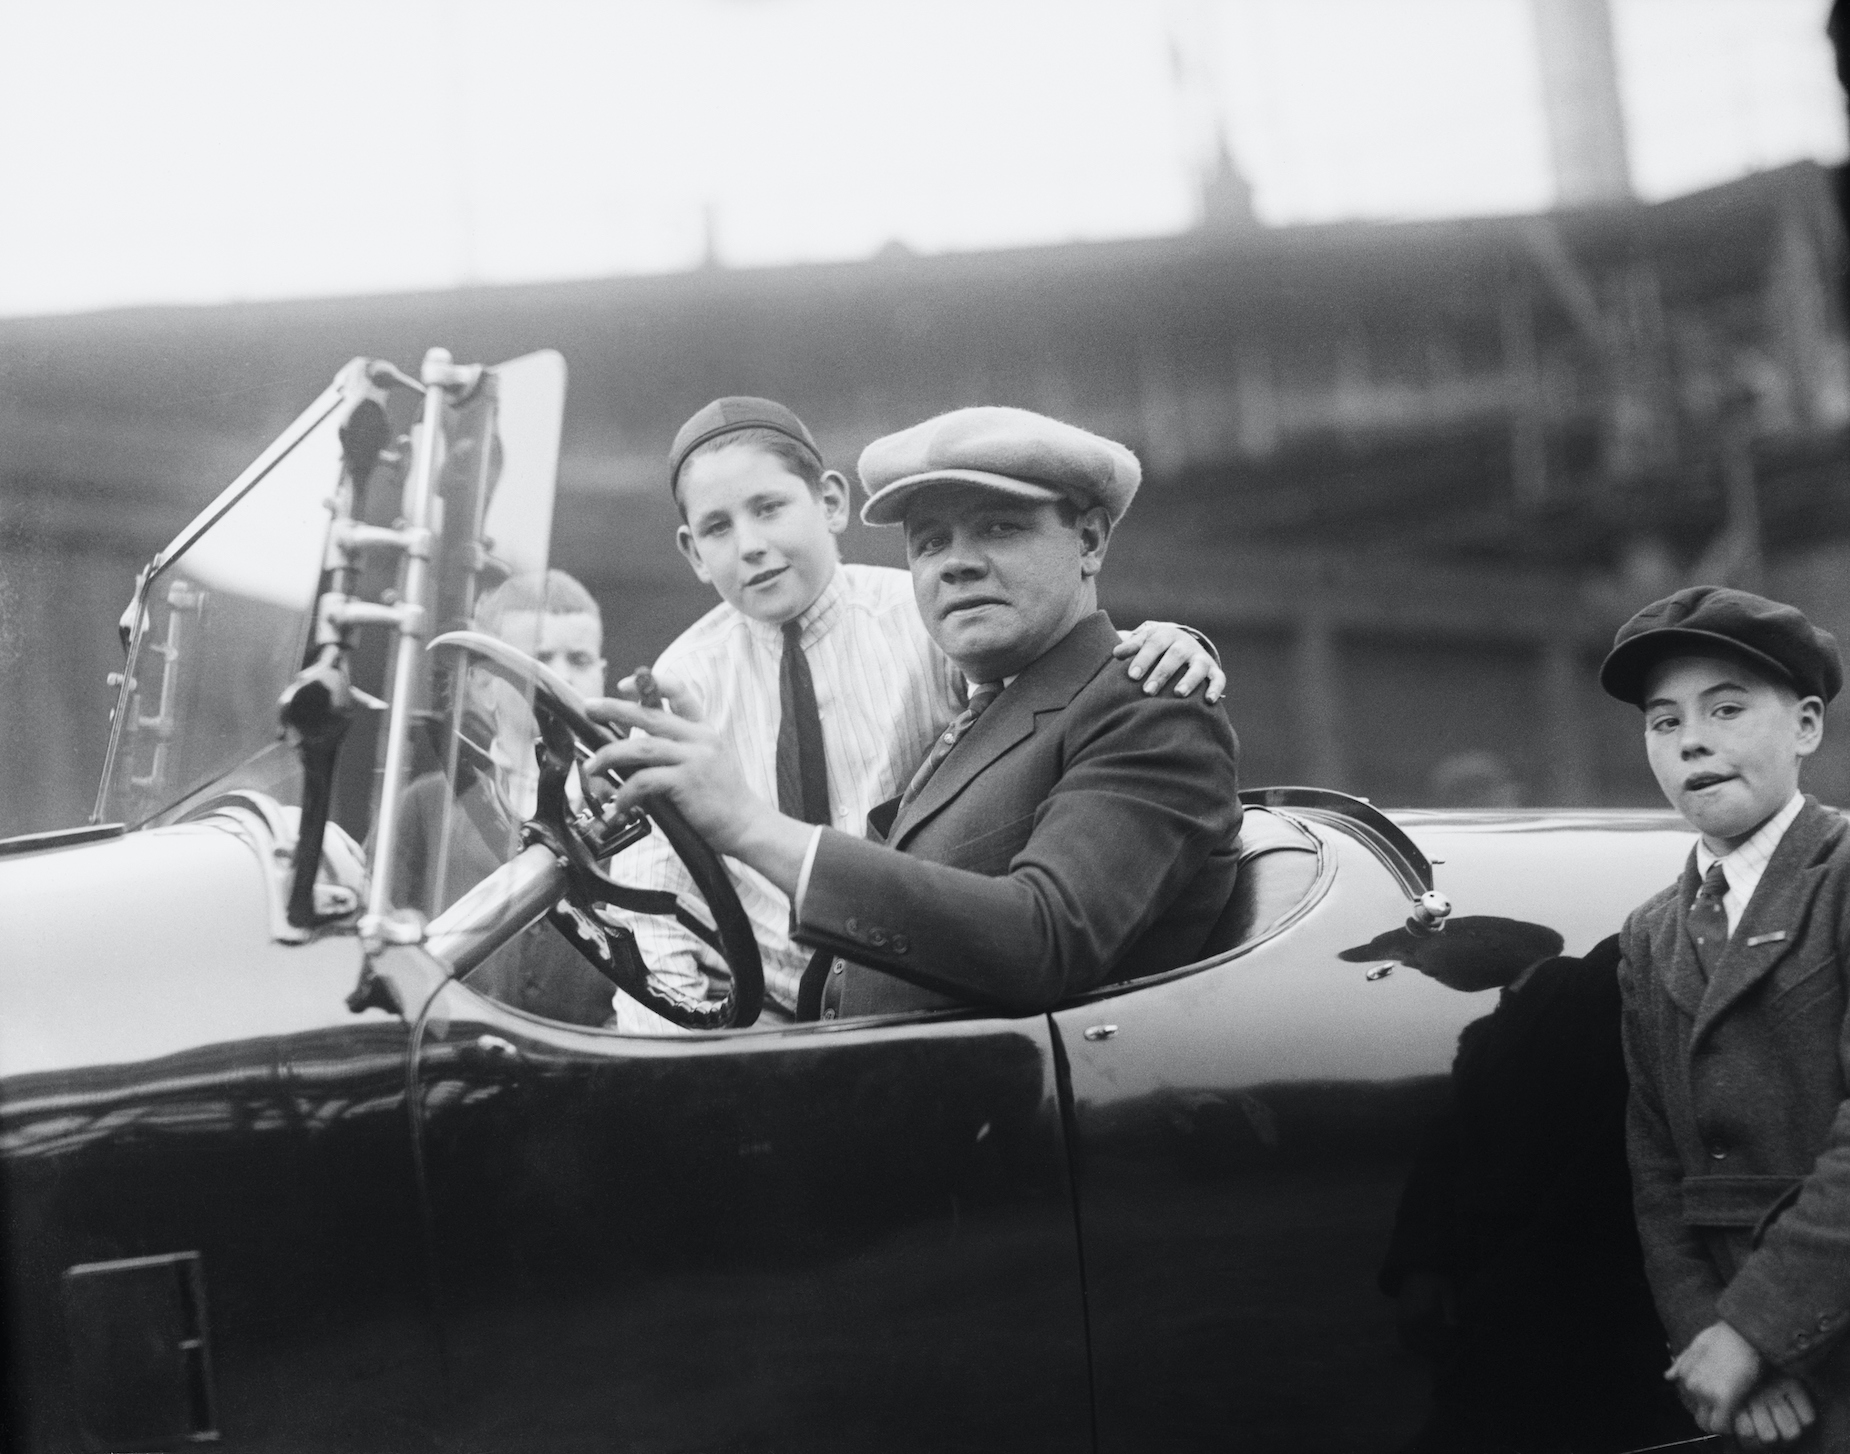 New York Yankees star Babe Ruth poses with two fans while driving his car.